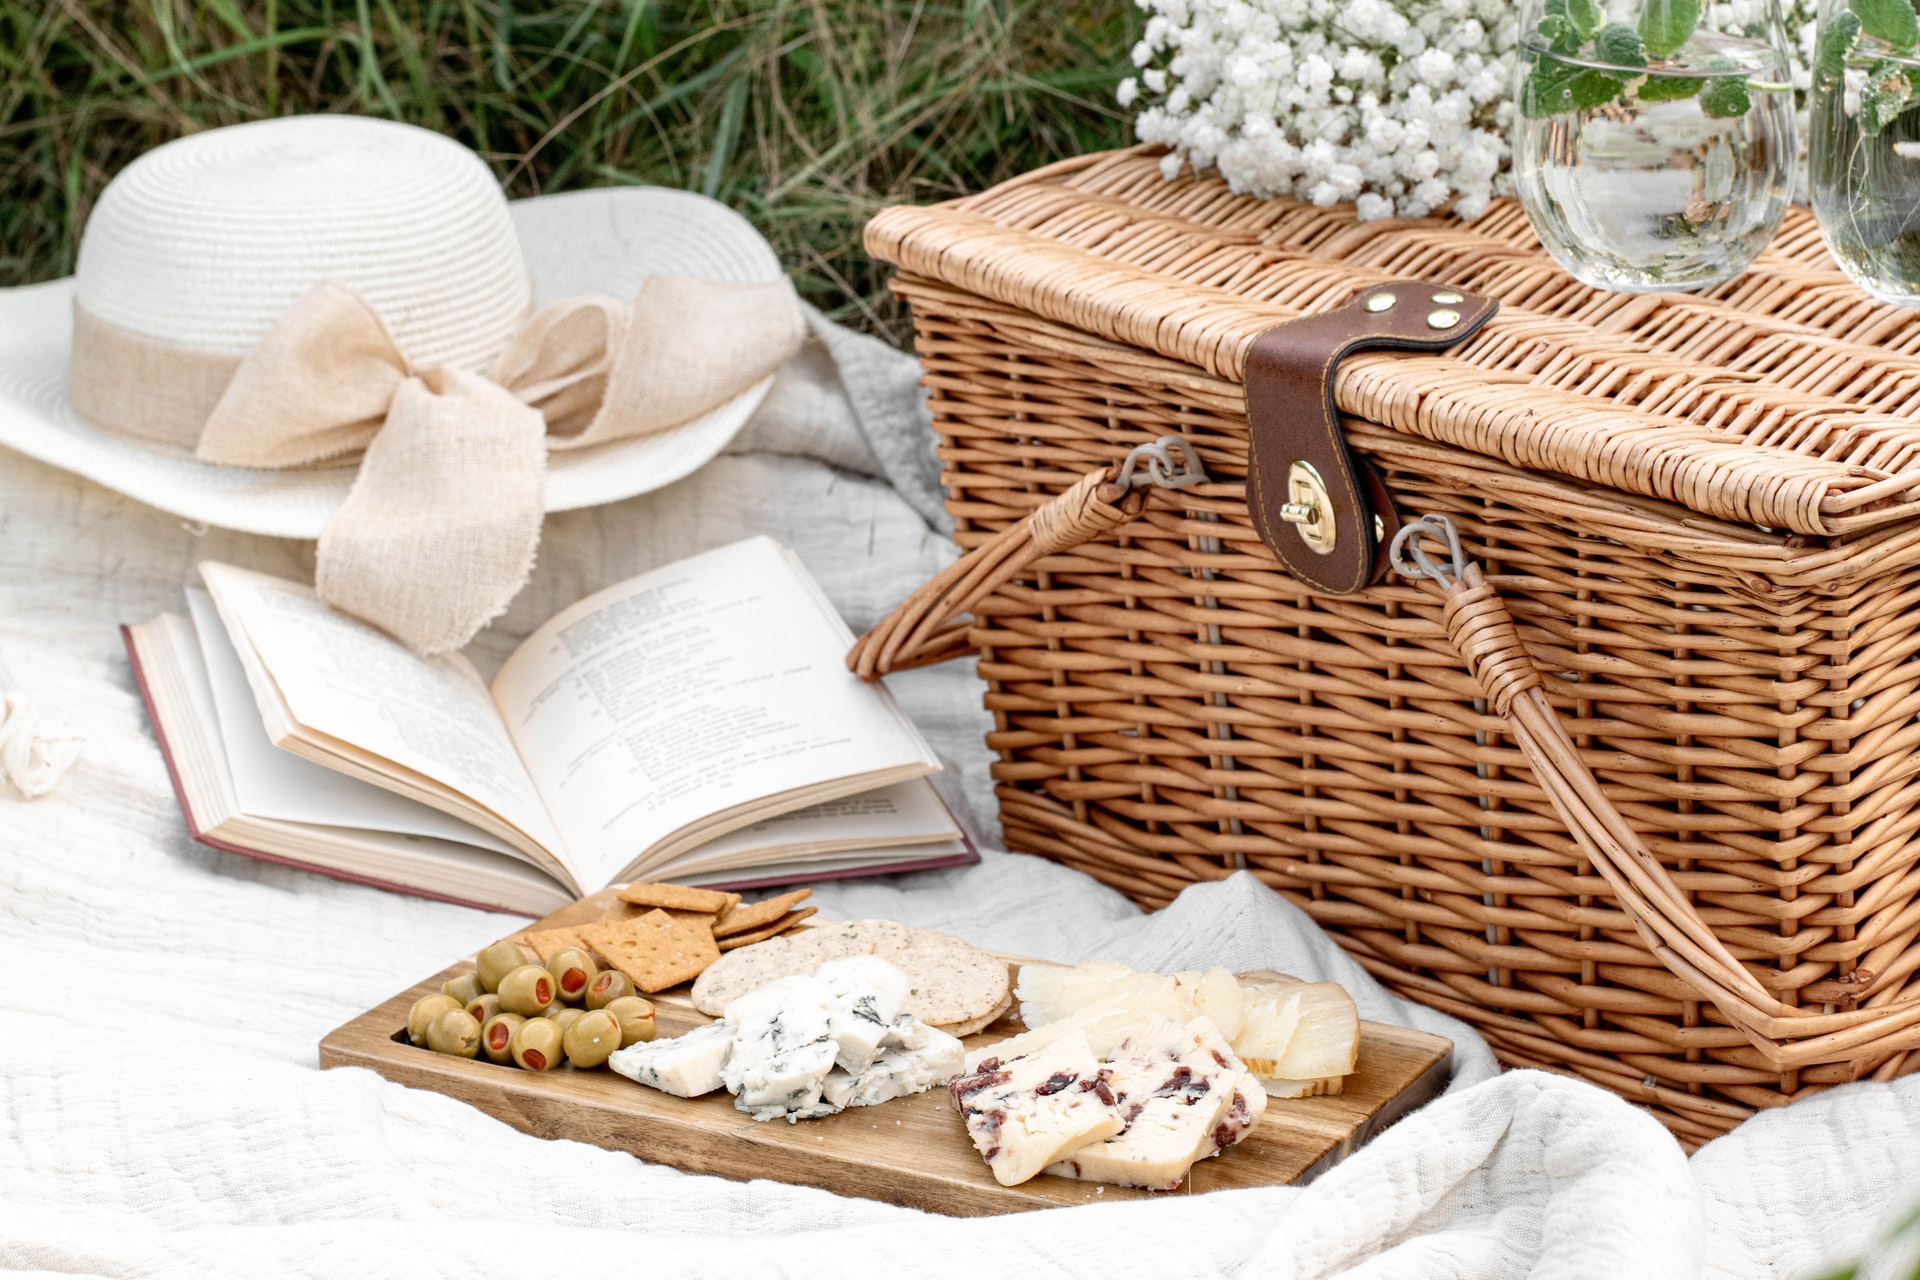 6 simple snacks that are great for a picnic in the park